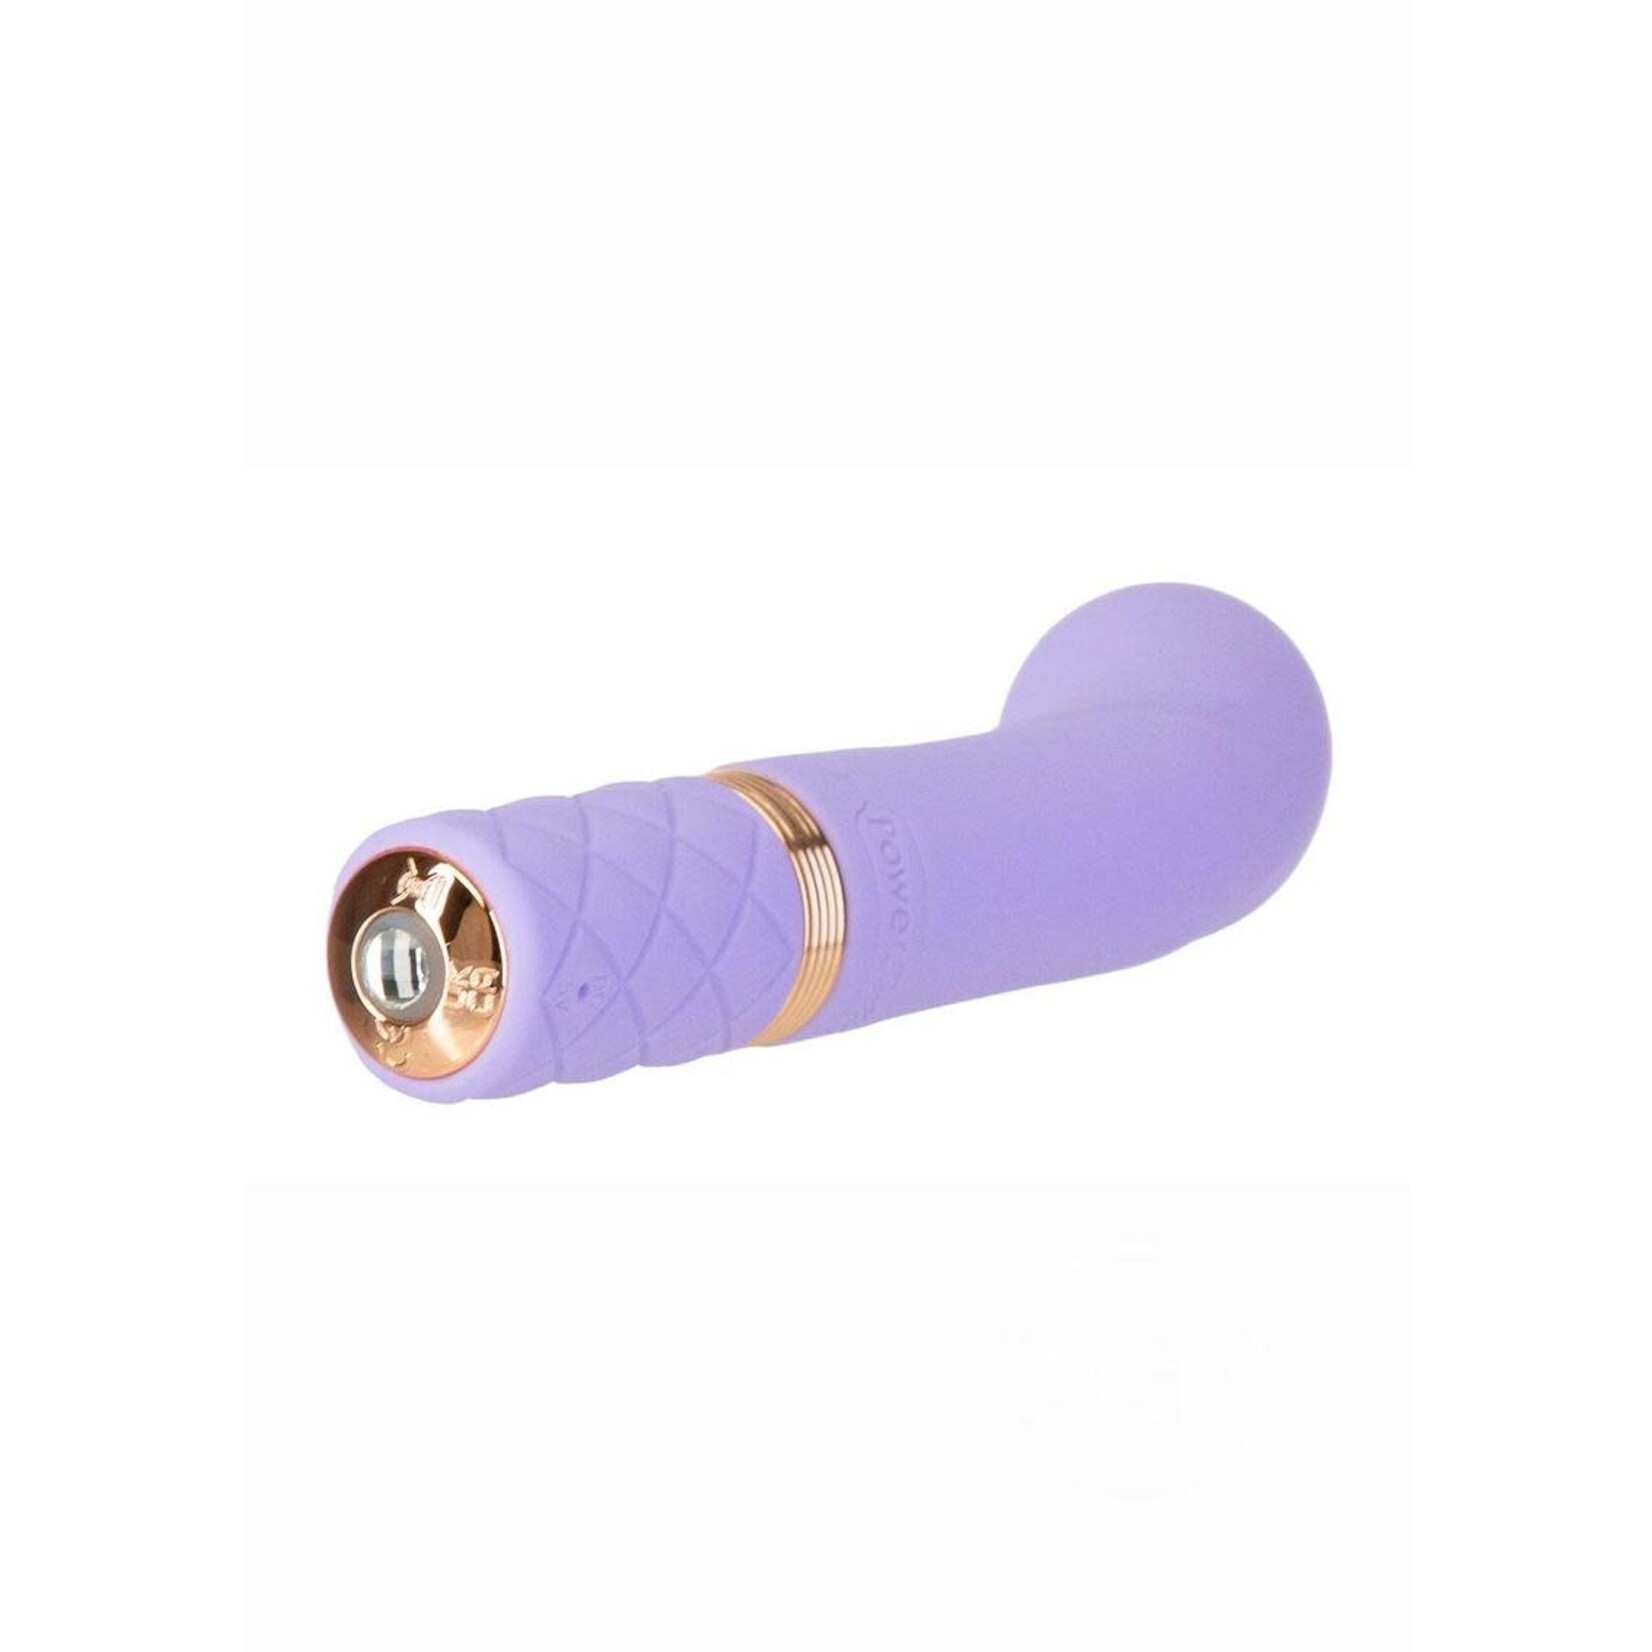 Pillow Talk Special Edition Racy Silicone Rechargeable G-Spot Mini Vibrator - Purple/Rose Gold